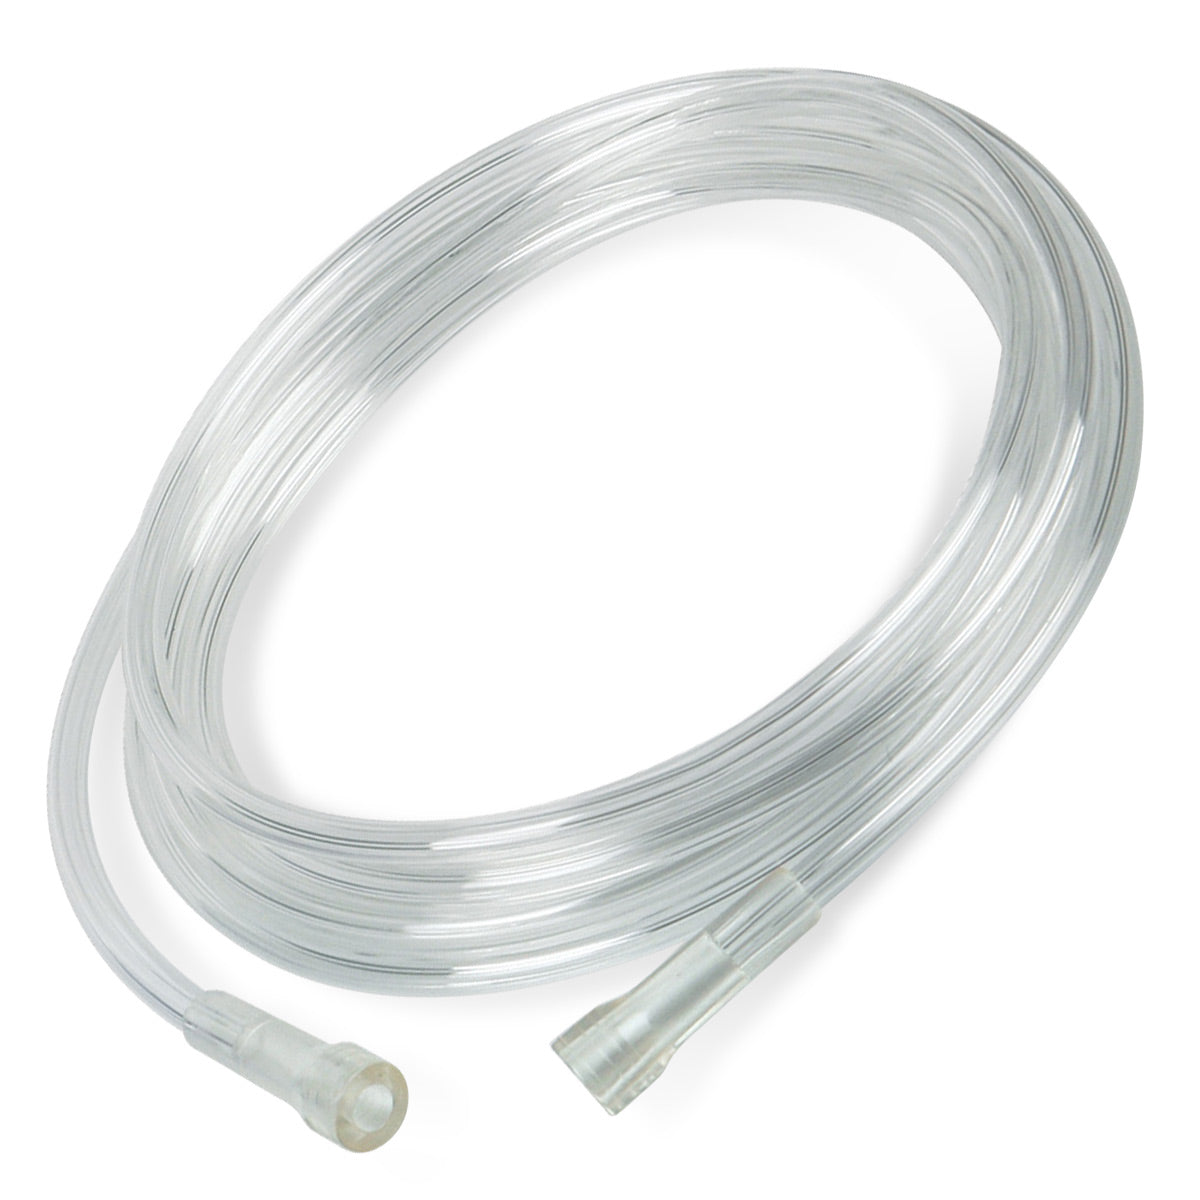 Clear Crush Resistant Multi-Channel Lumen 25 Foot Oxygen Supply Tubing